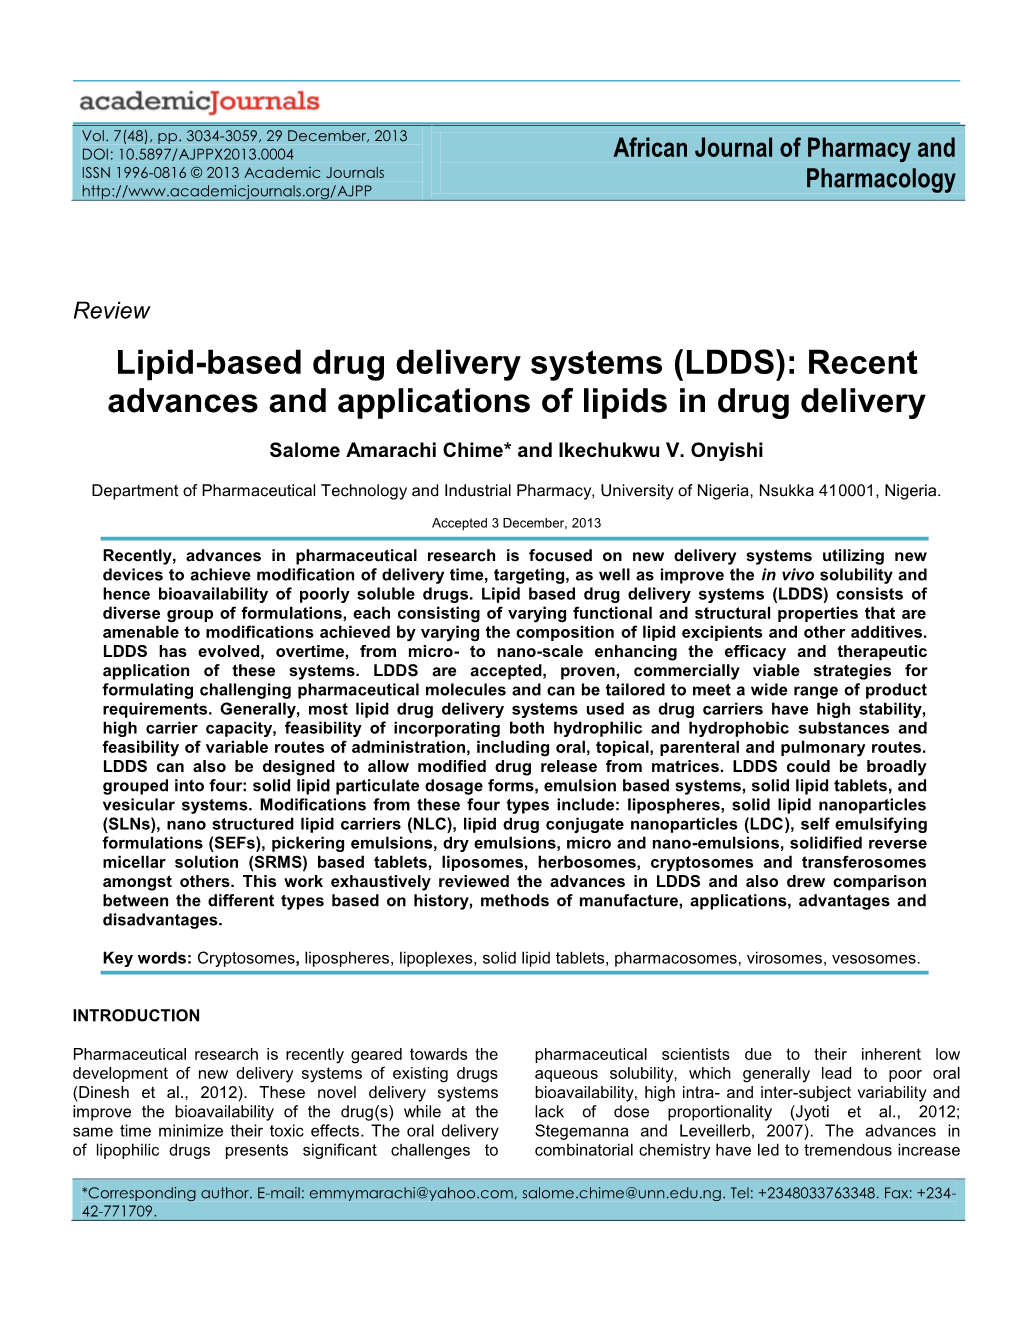 (LDDS): Recent Advances and Applications of Lipids in Drug Delivery